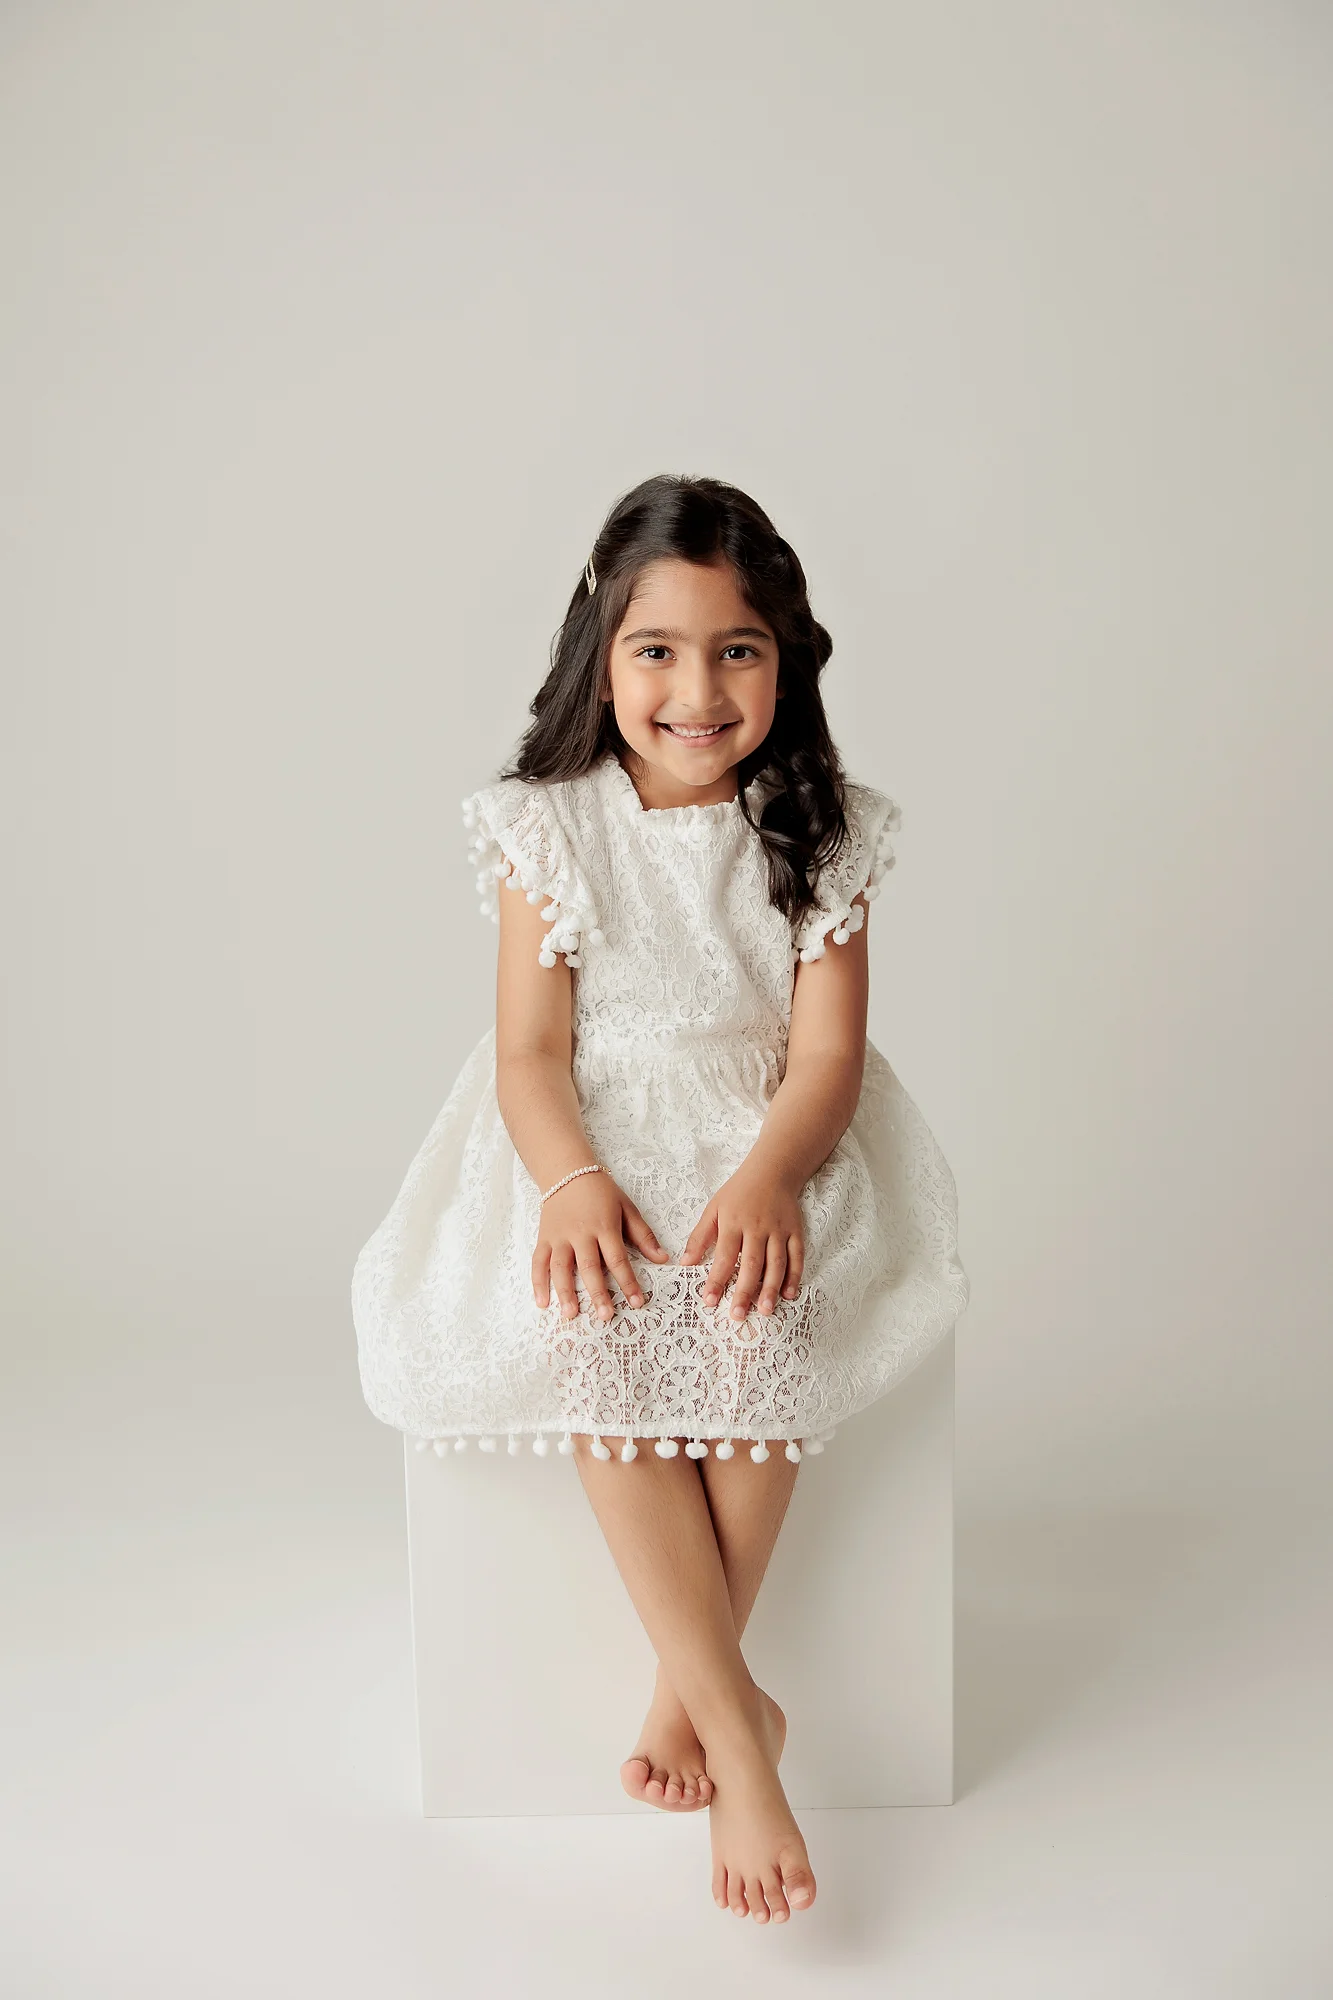 child portrait photography calgary of a girl sitting on a white box